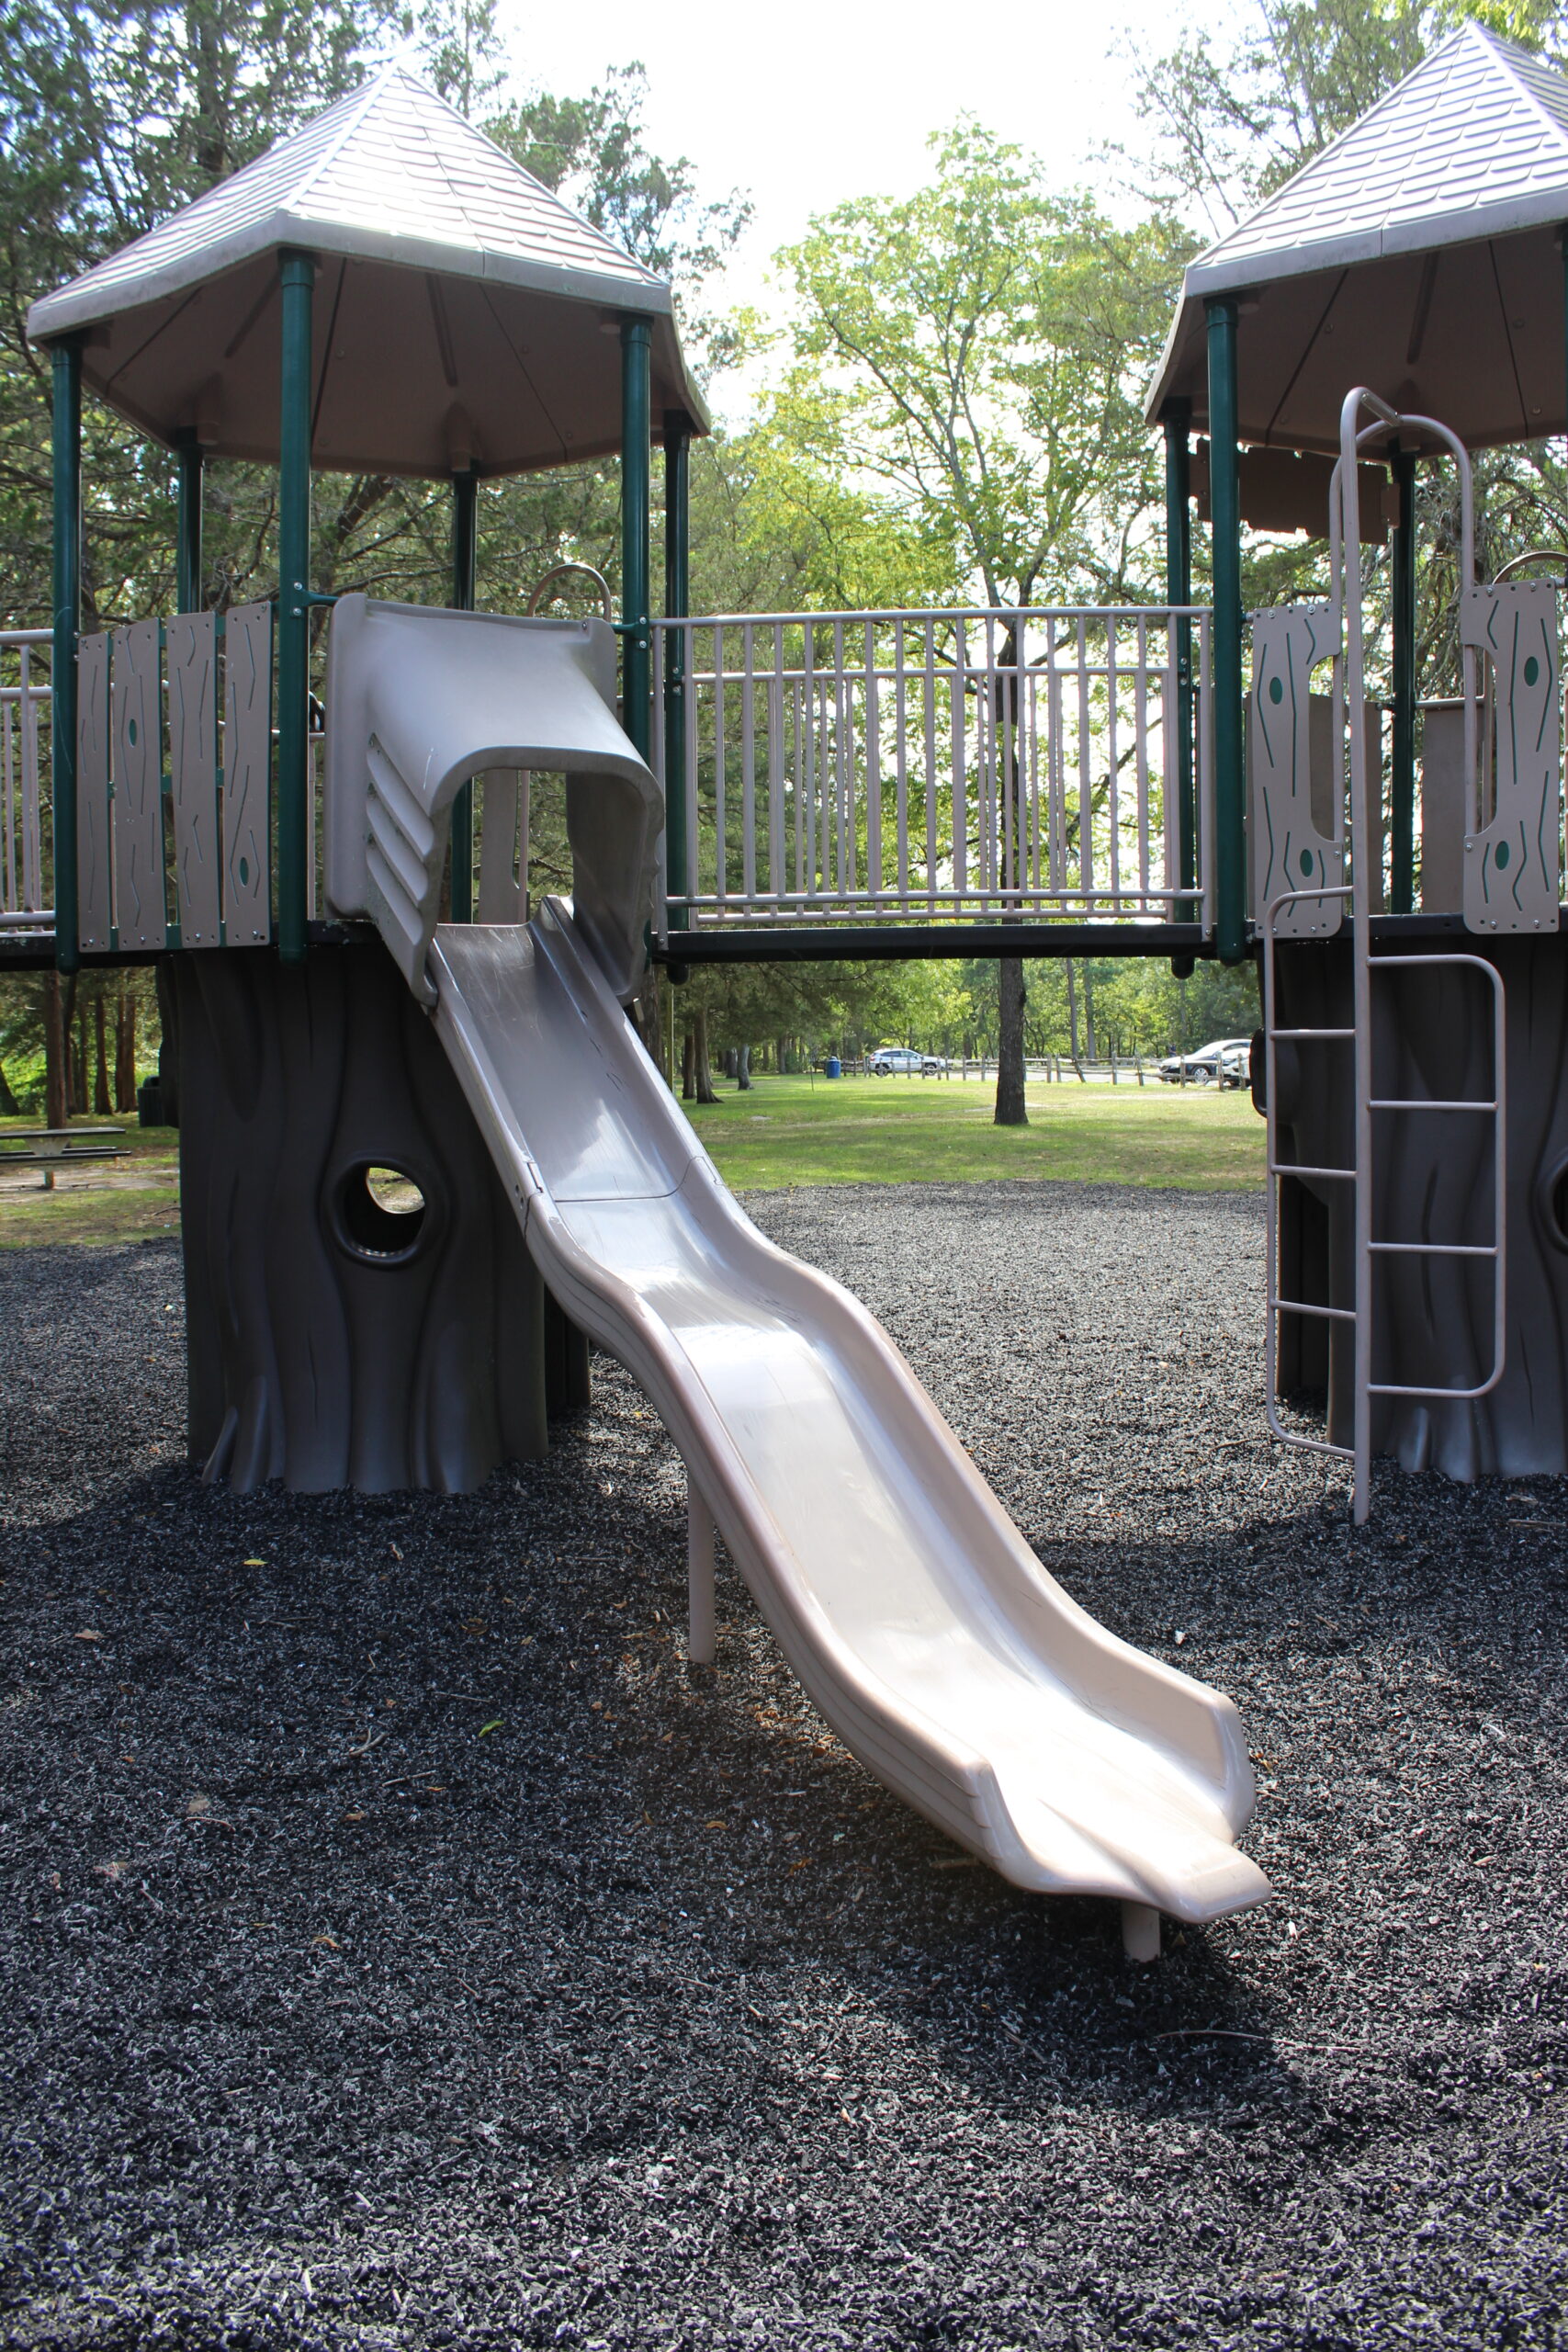 Back Estell Manor Park Playgrounds in Mays Landing NJ - SLIDES - long open wavy slide at treehouse TALL image